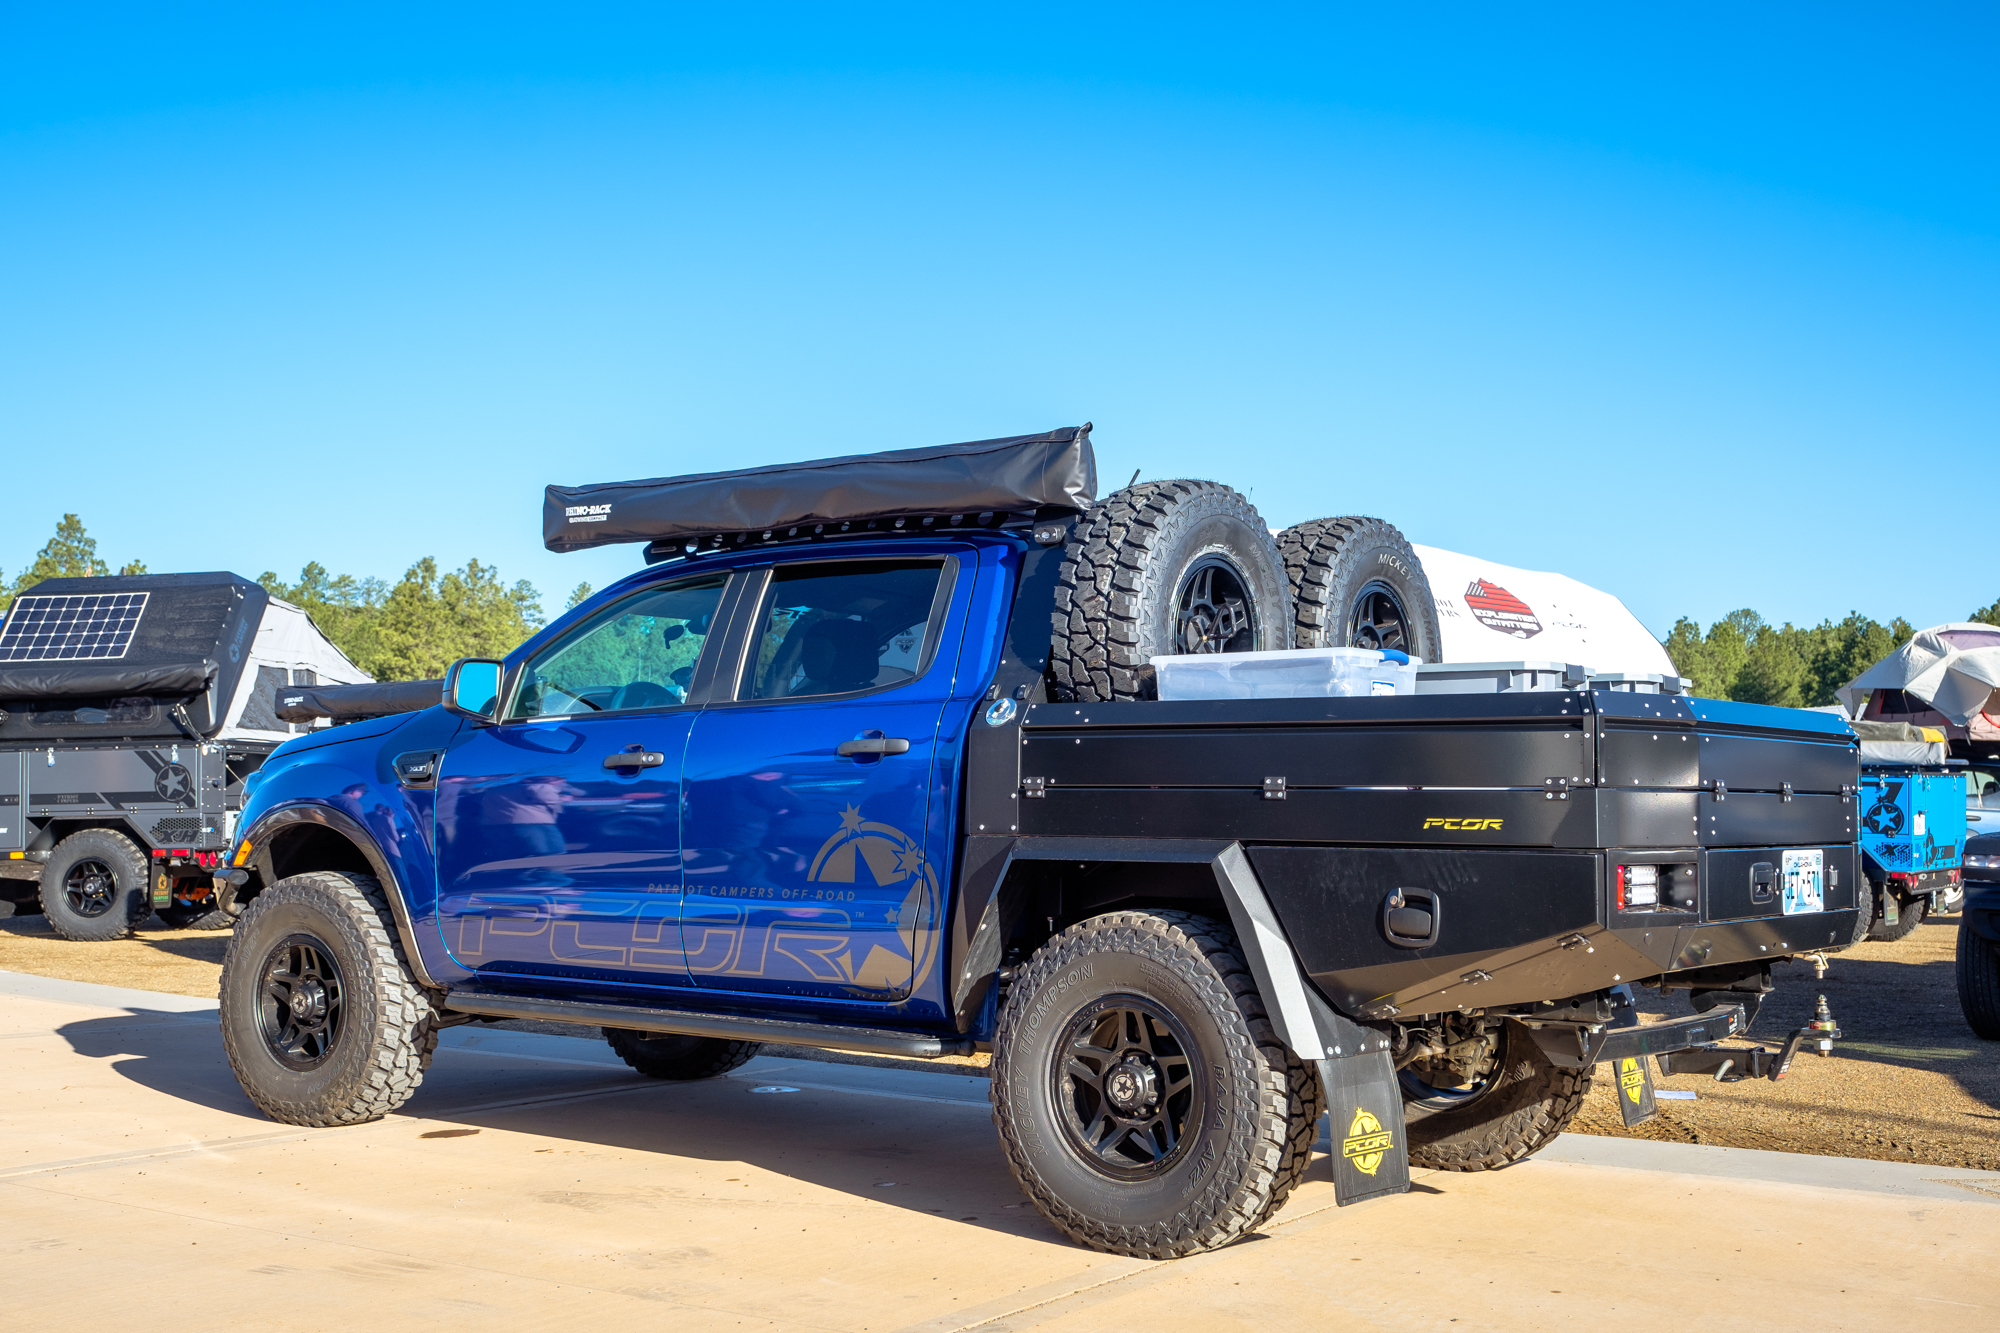 2019 overland expo west vagabond outdoors